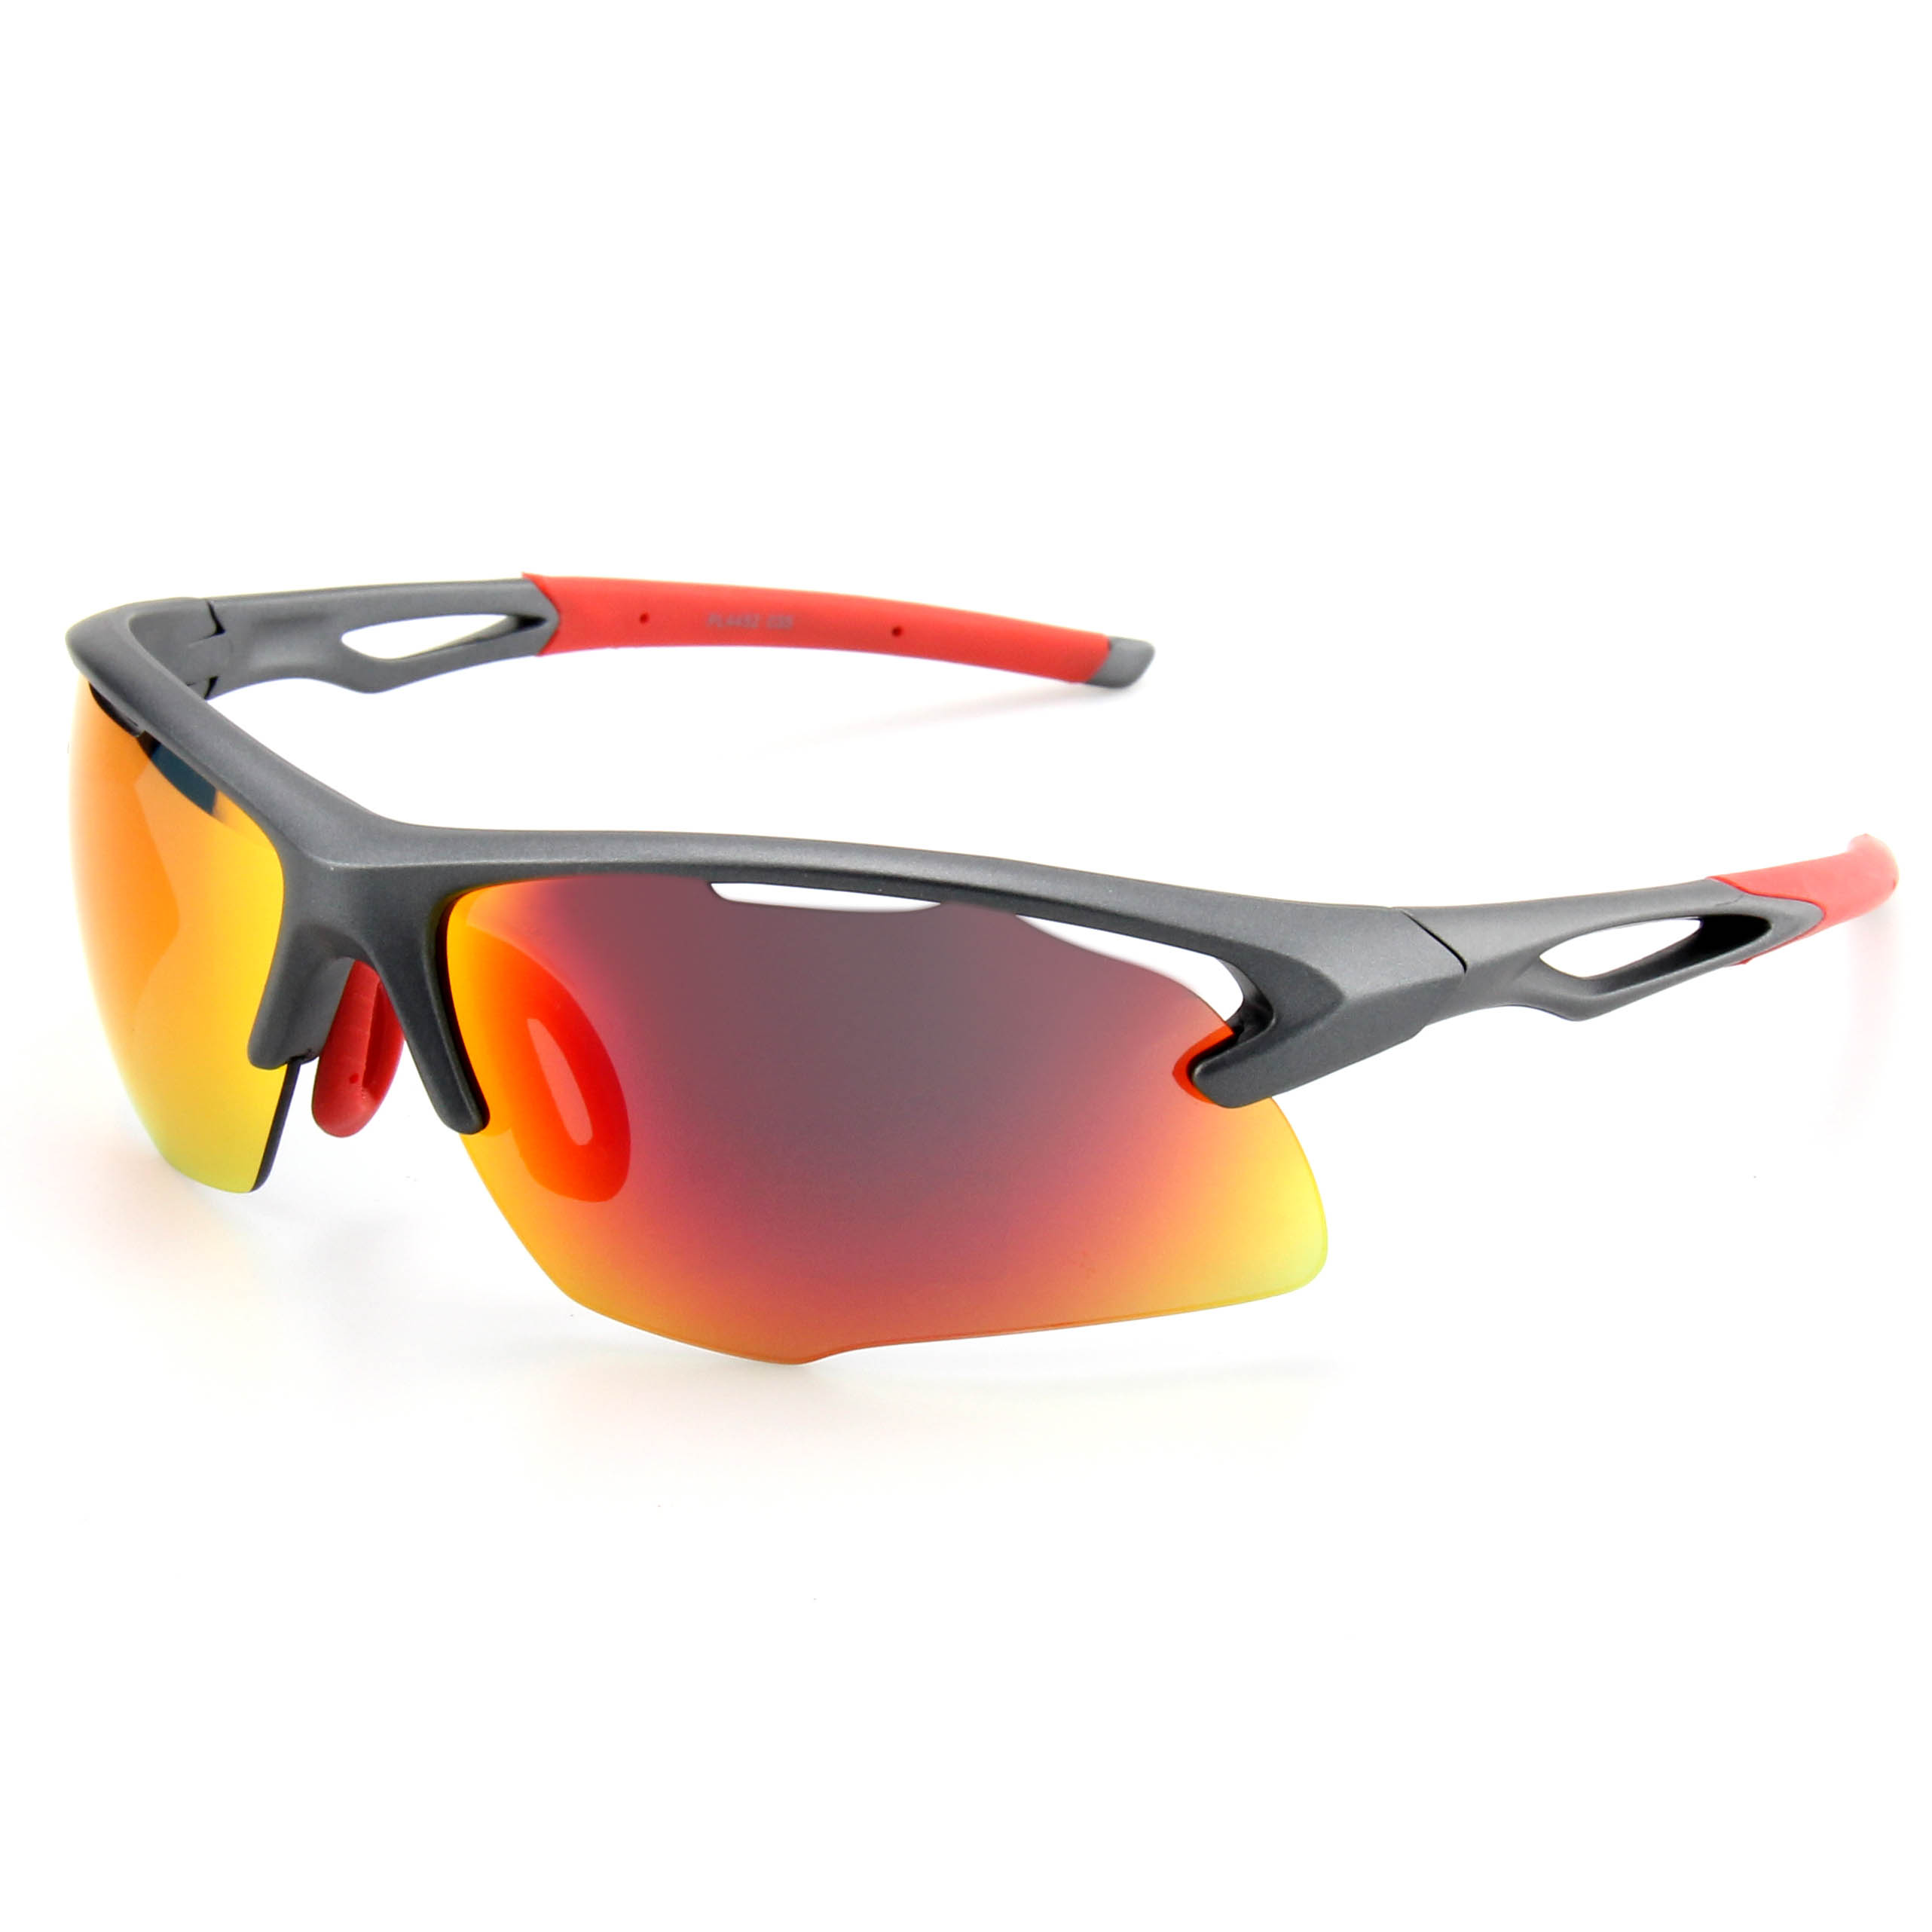 Eugenia sports sunglasses manufacturers quality assurance for sports-1